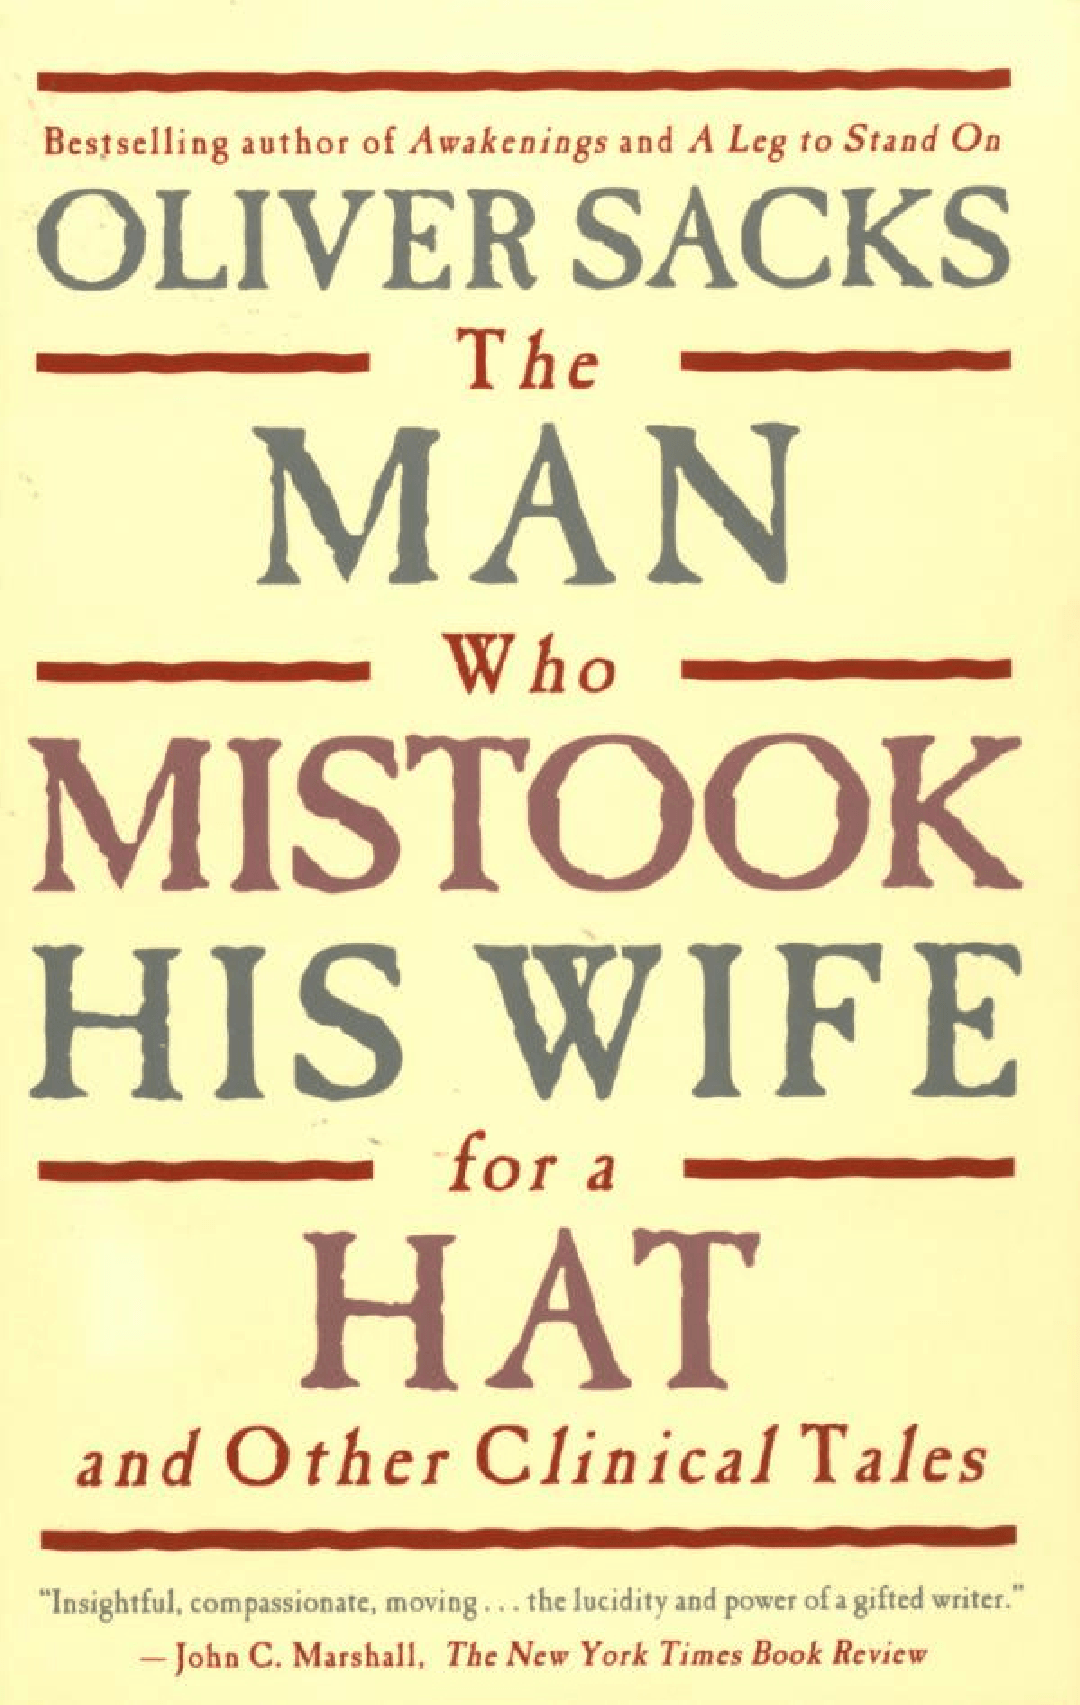 The Man Who Mistook His Wife for a Hat Summary